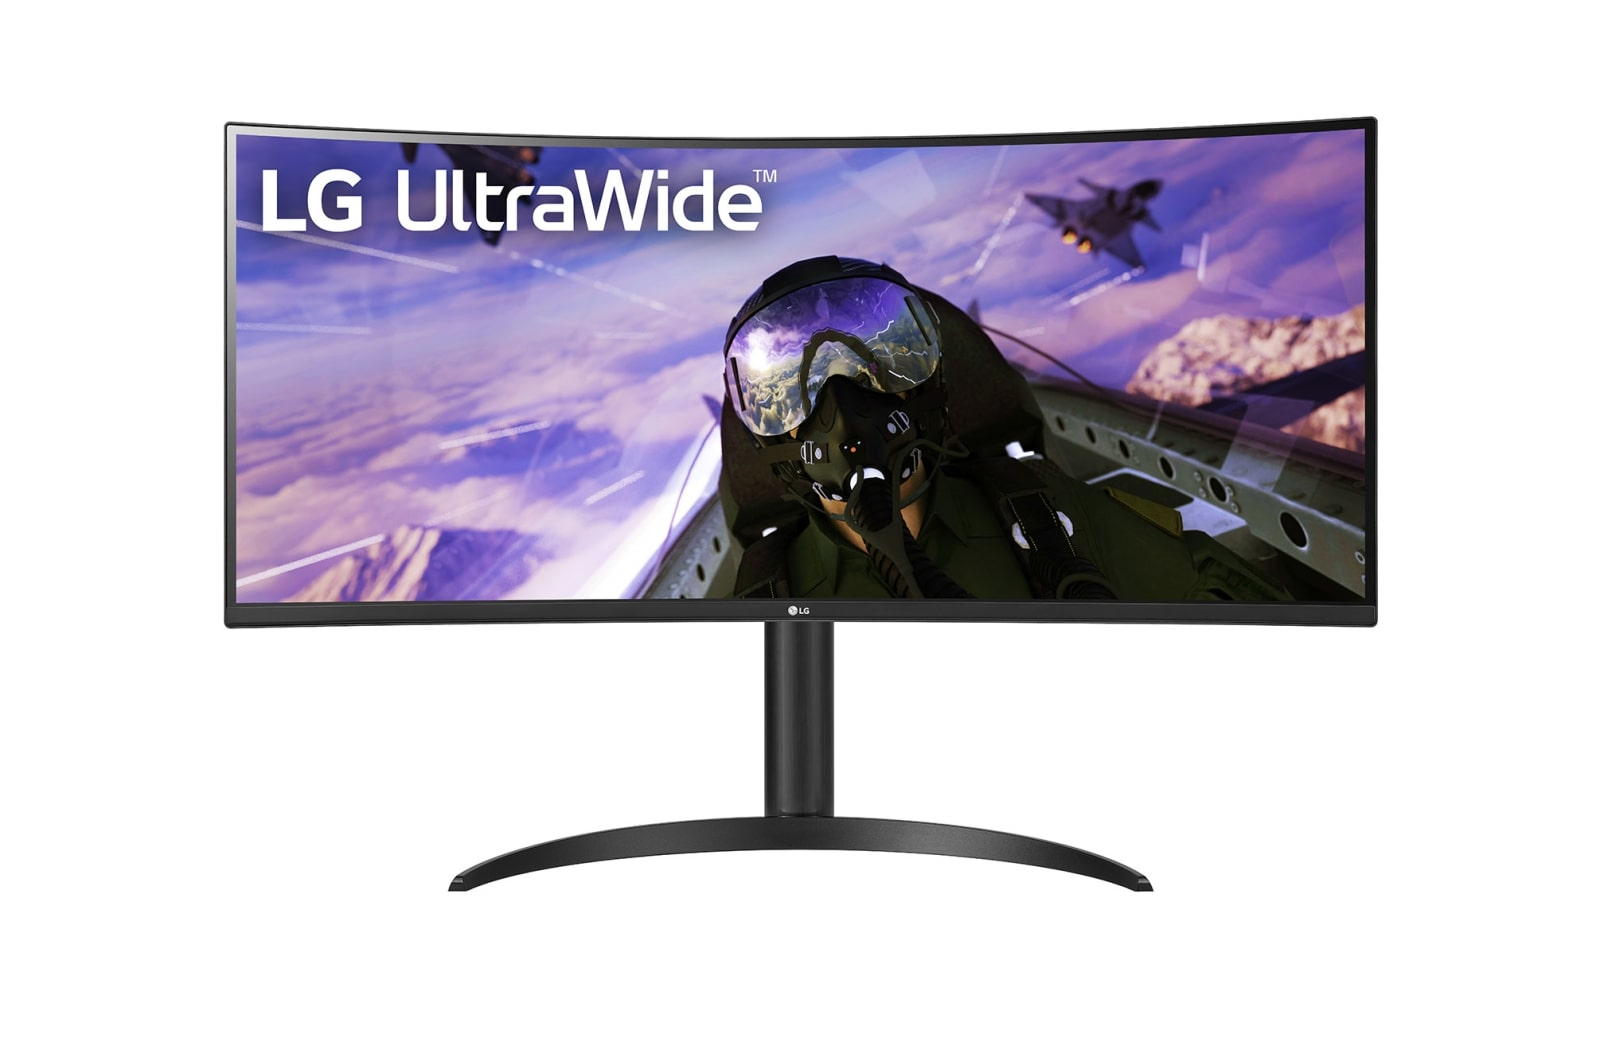 34'' Curved UltraWide 3440x1440, 300 cd/m?, 21:9, 160Hz, HDR10, HDMI, Headphone out, 809 X 568.3 X 260mm, 7.7kg